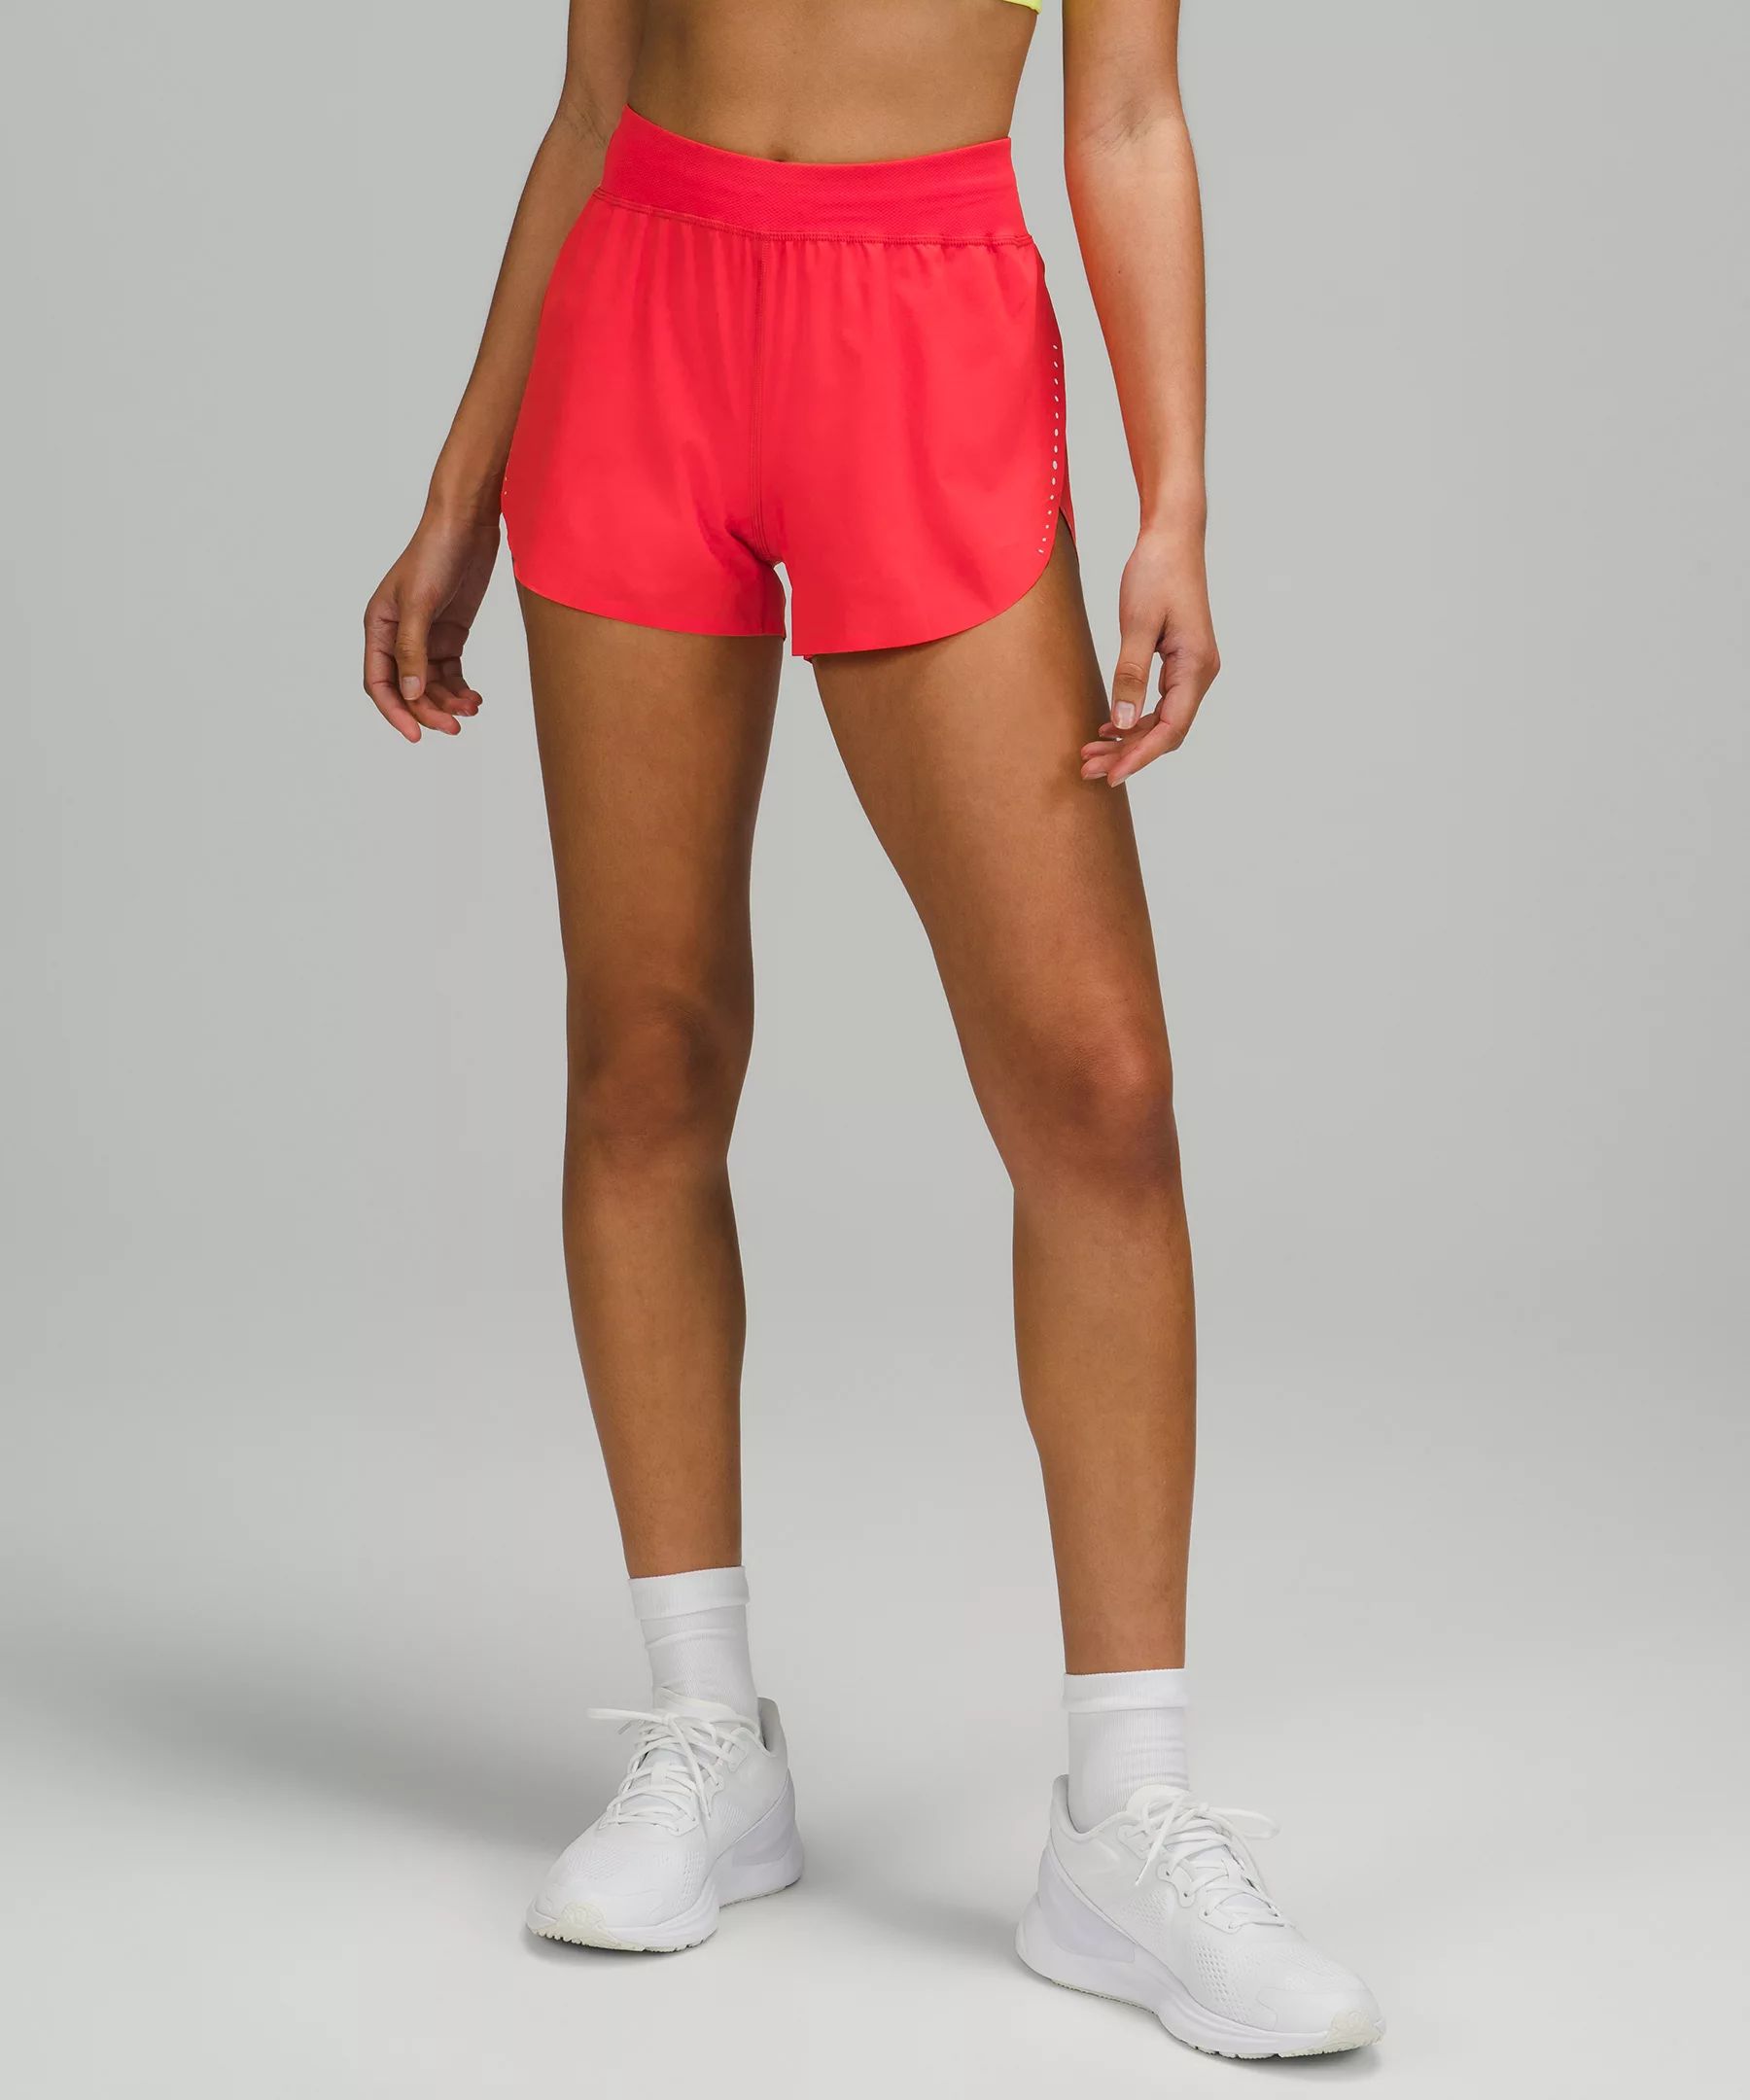 Find Your Pace High-Rise Lined Short 3" | Lululemon (US)